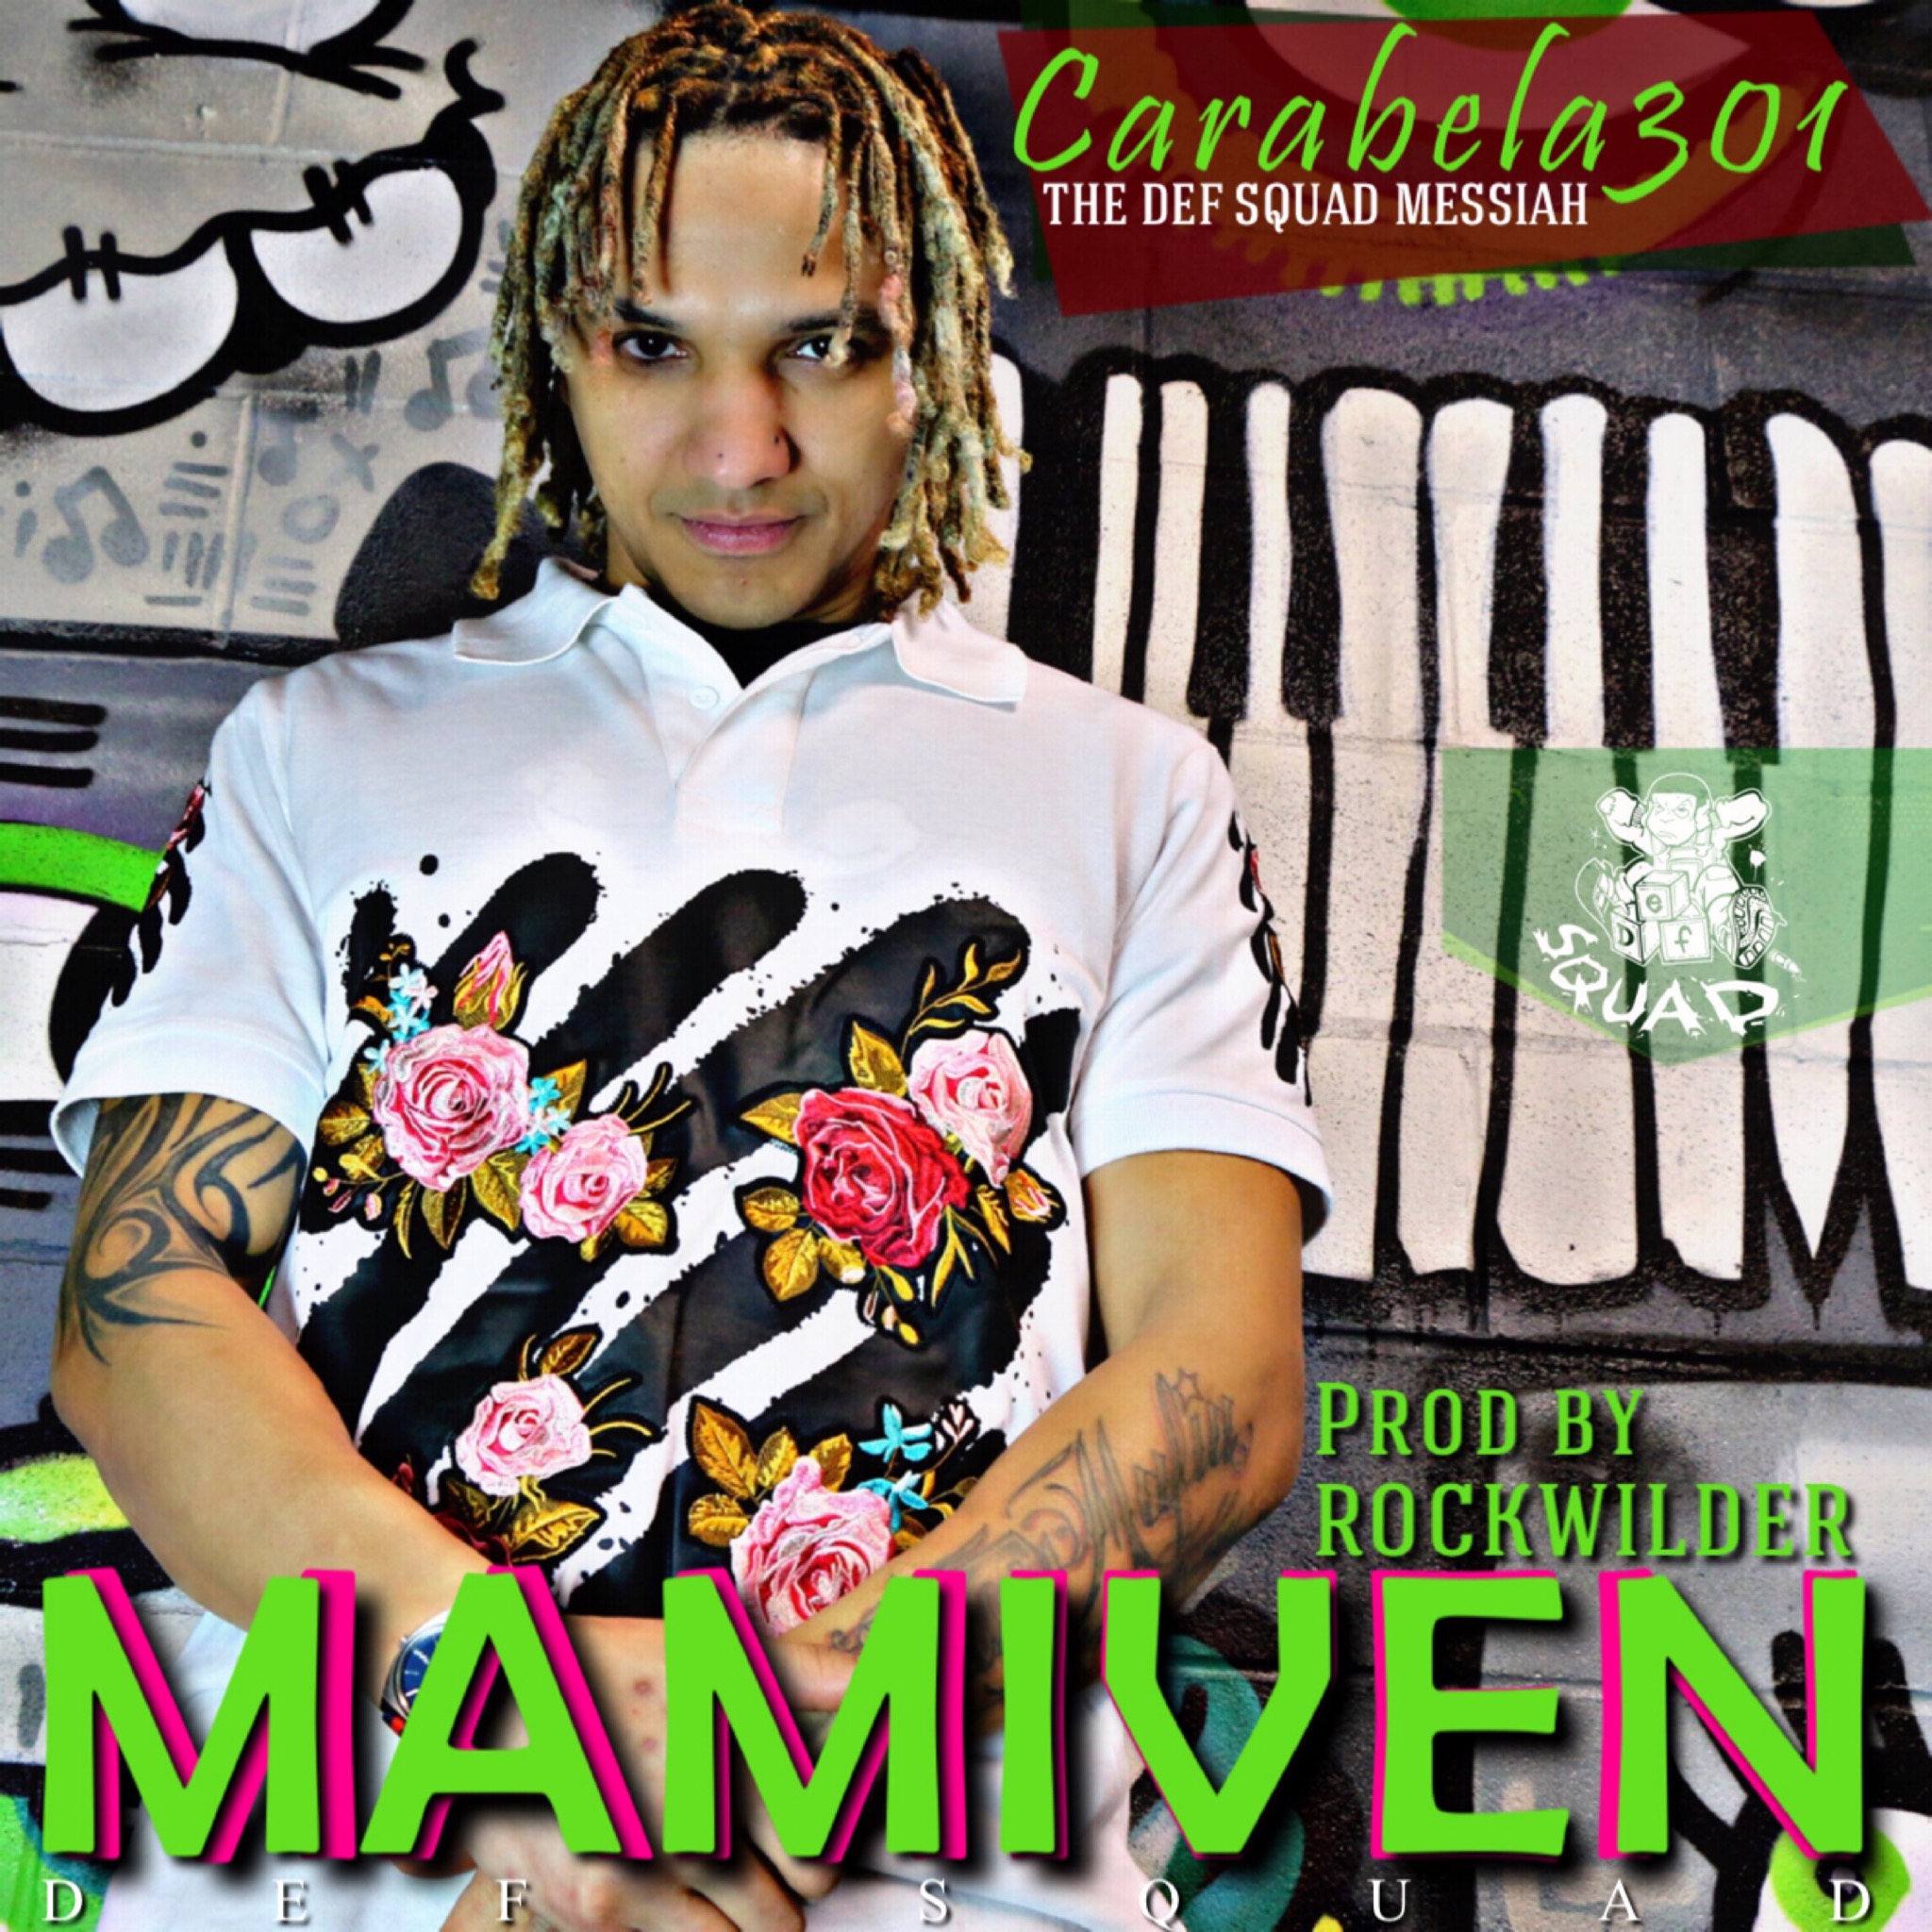 Mami Ven - Produced By Rockwilder